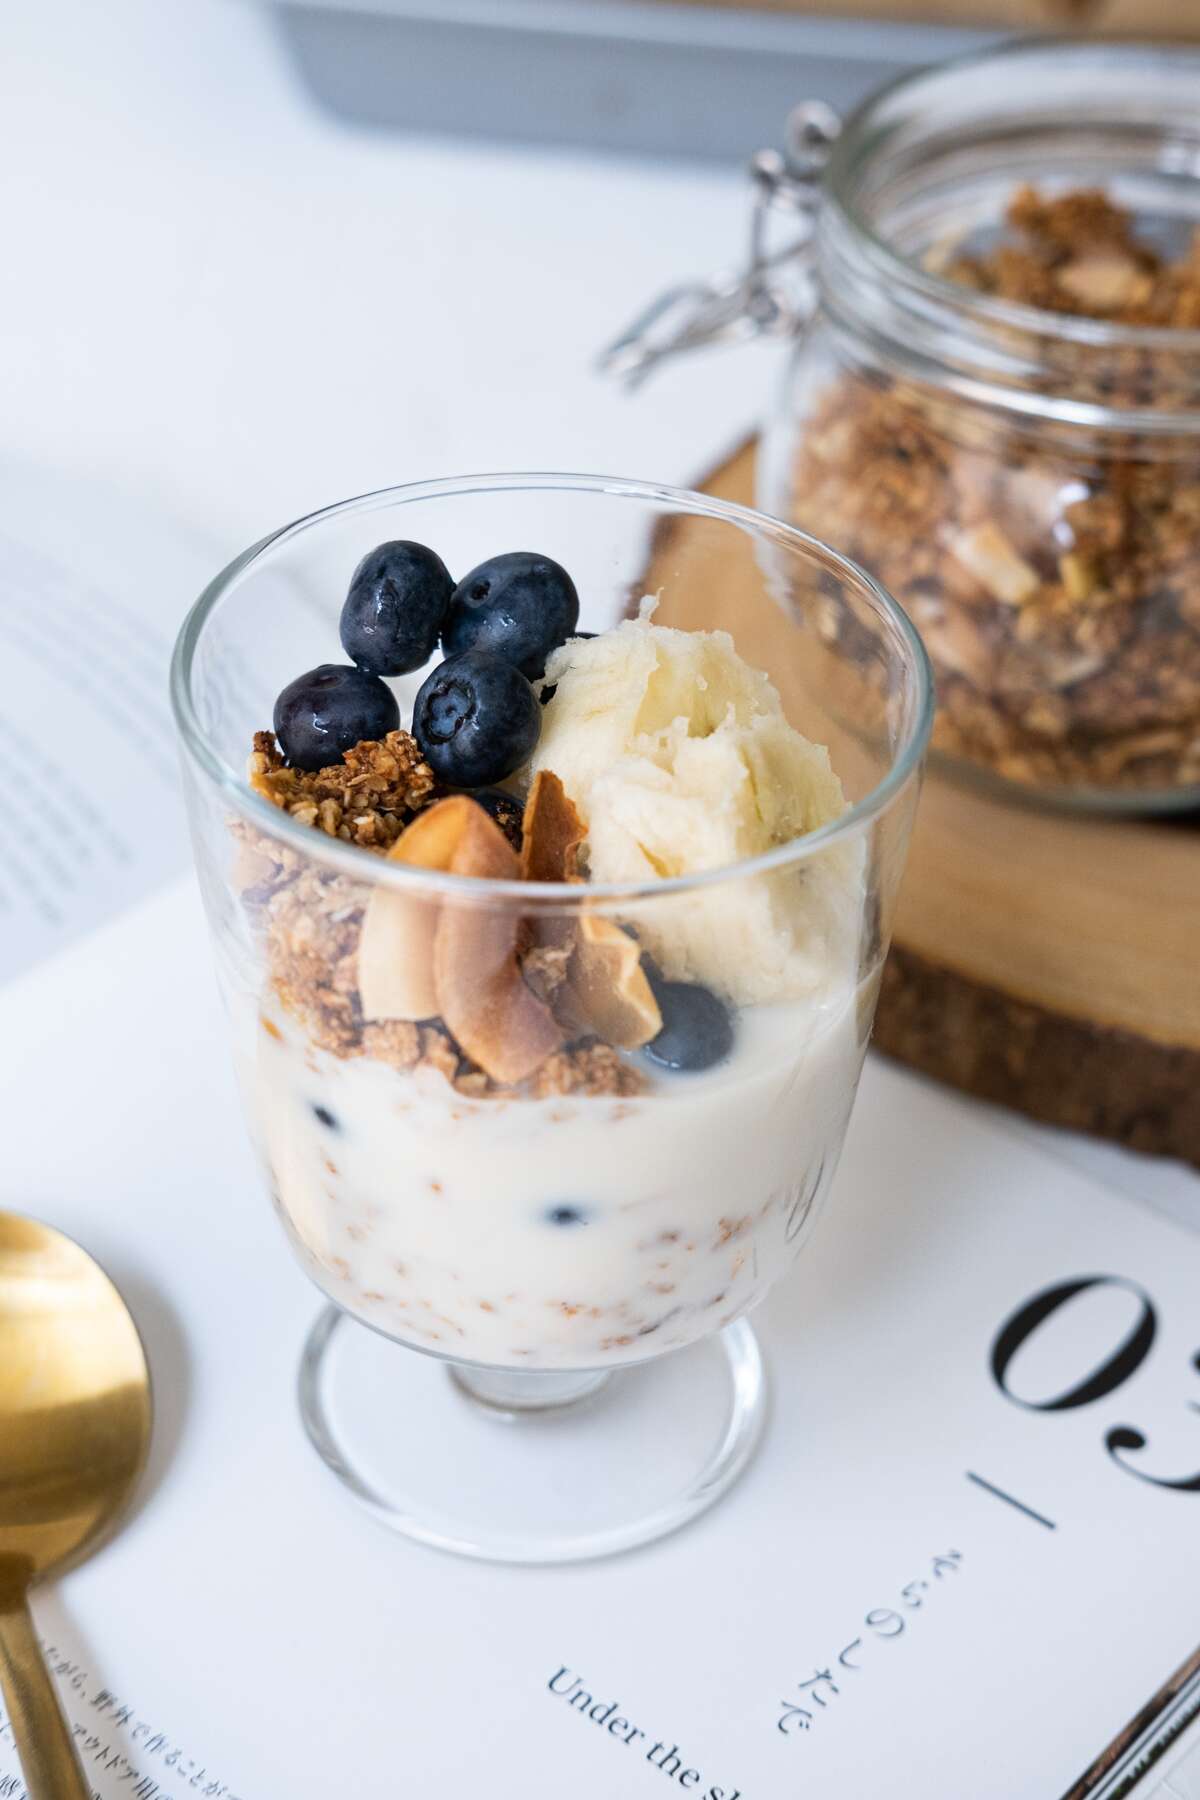 Serve granola with fresh blueberries, banana and milk in a glass.